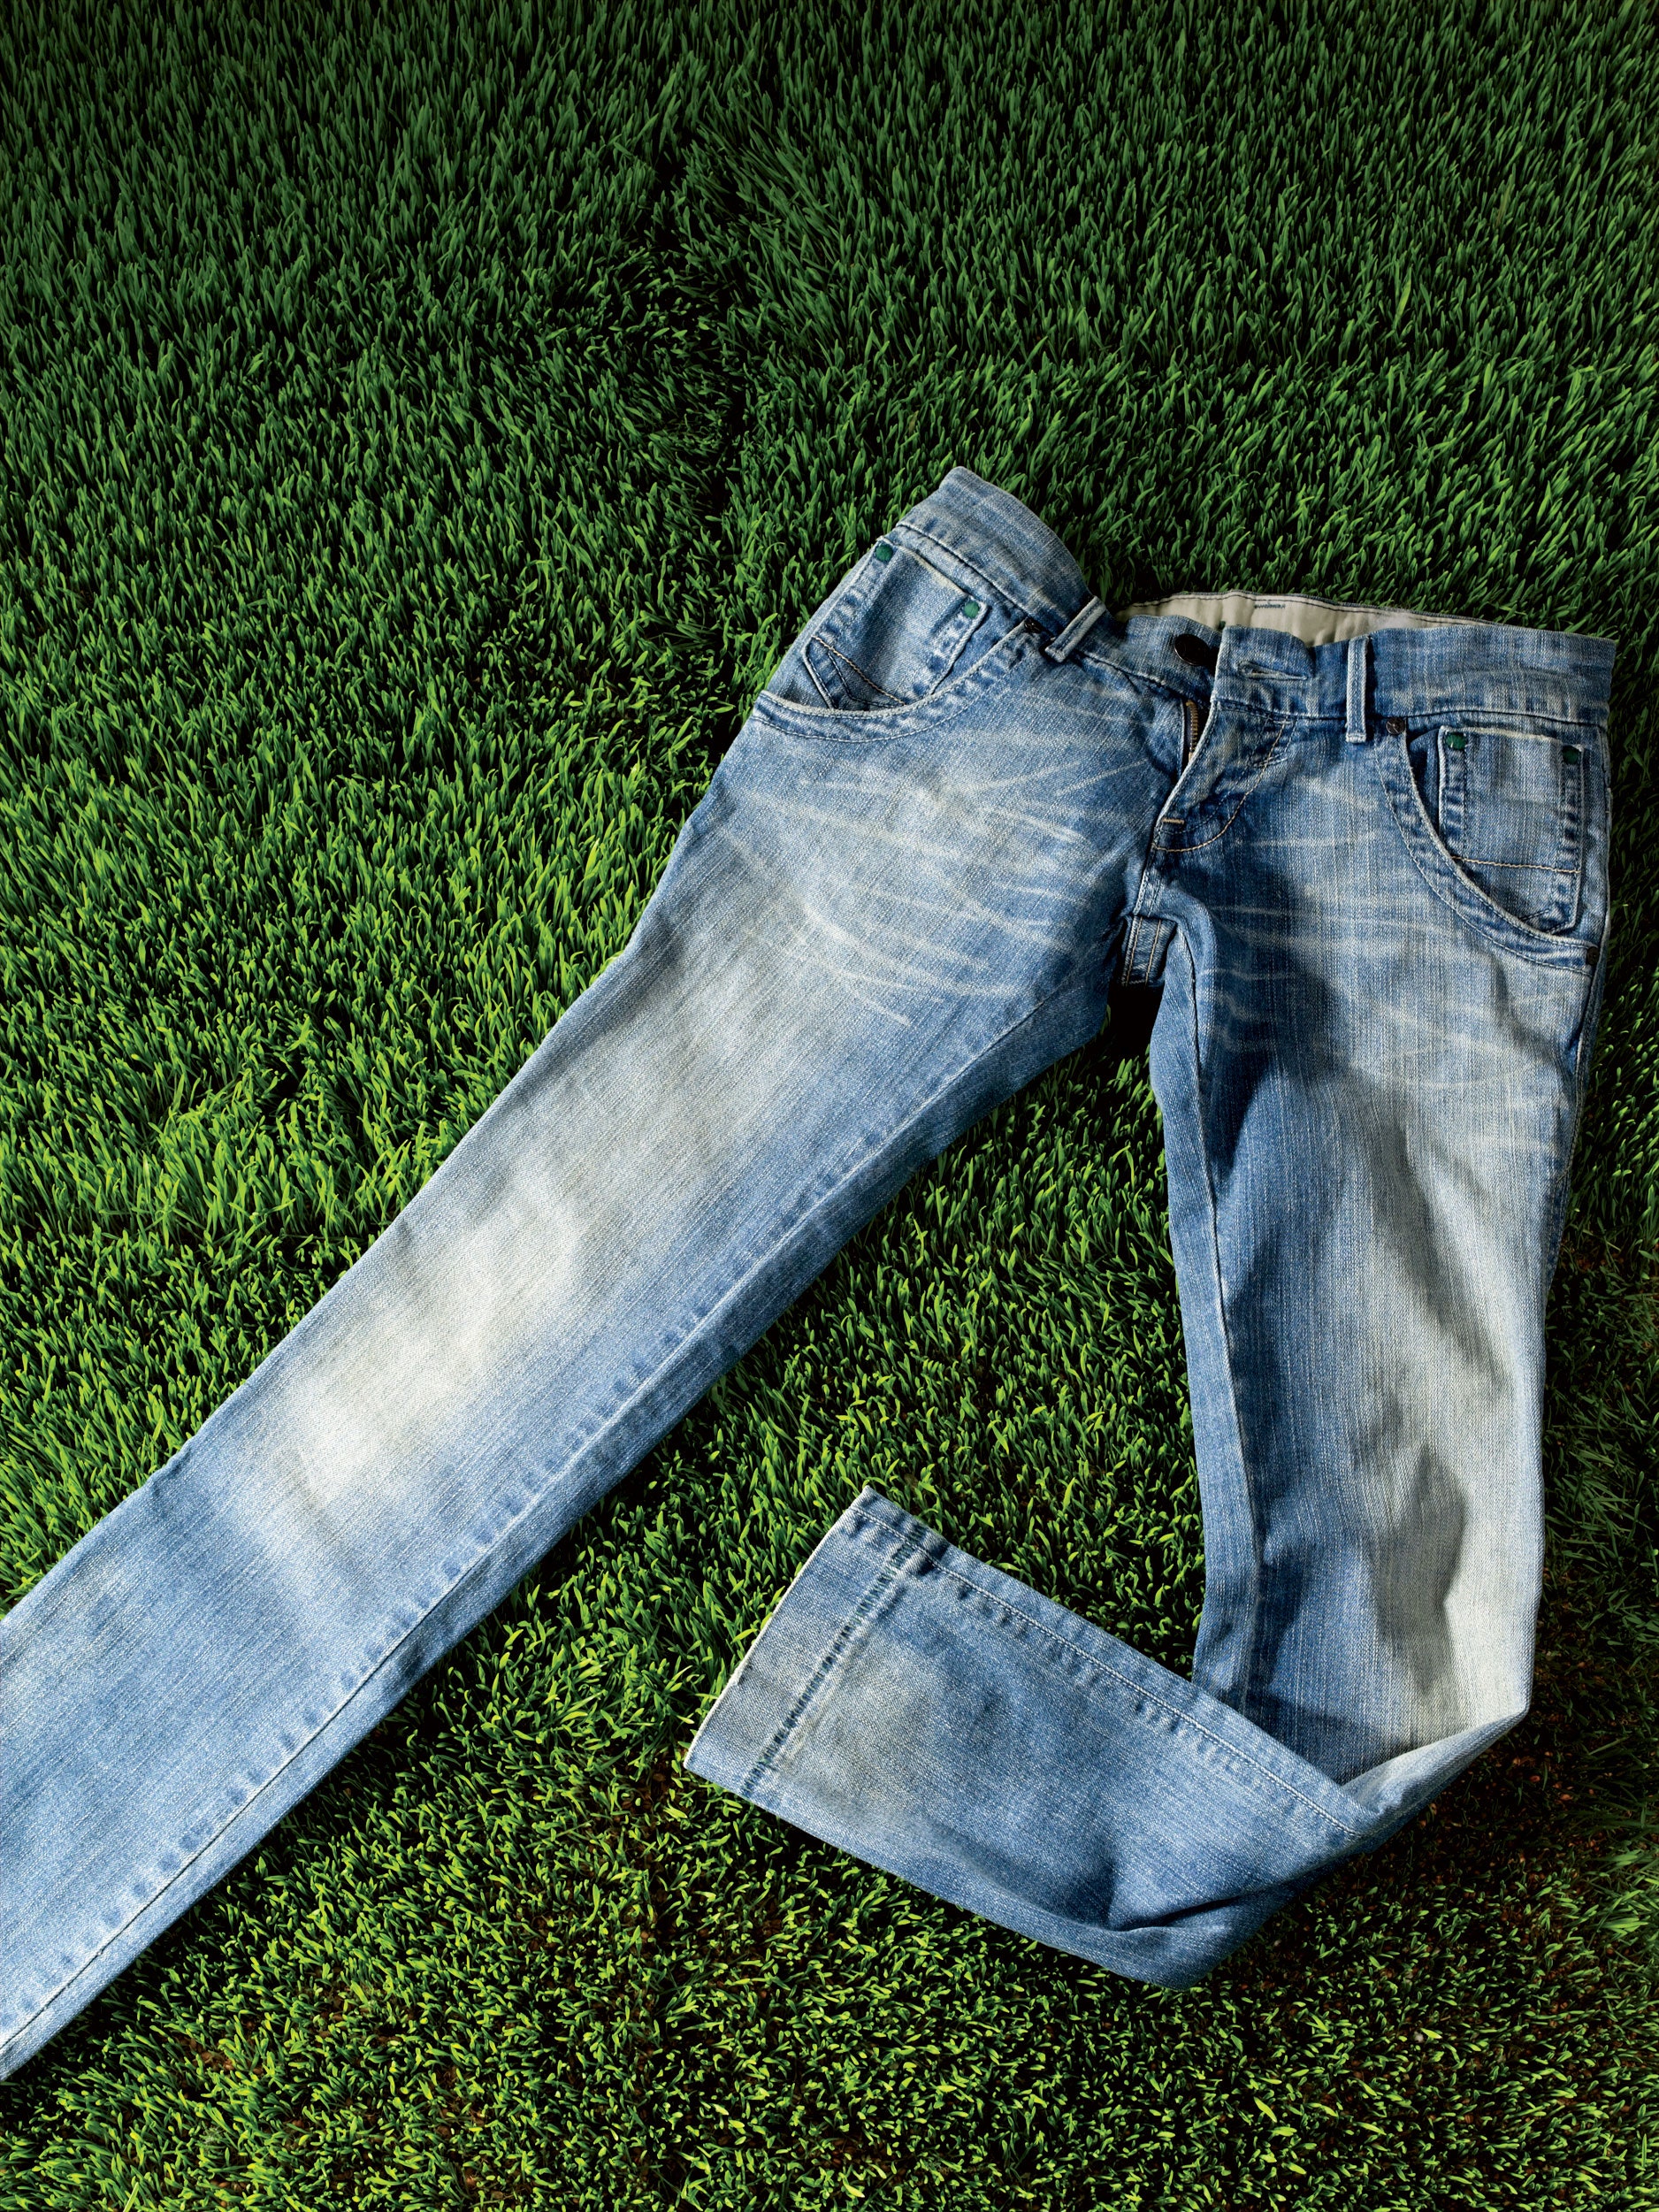 Which Expensive Jeans Brand Worth It? Top Rankings Revealed